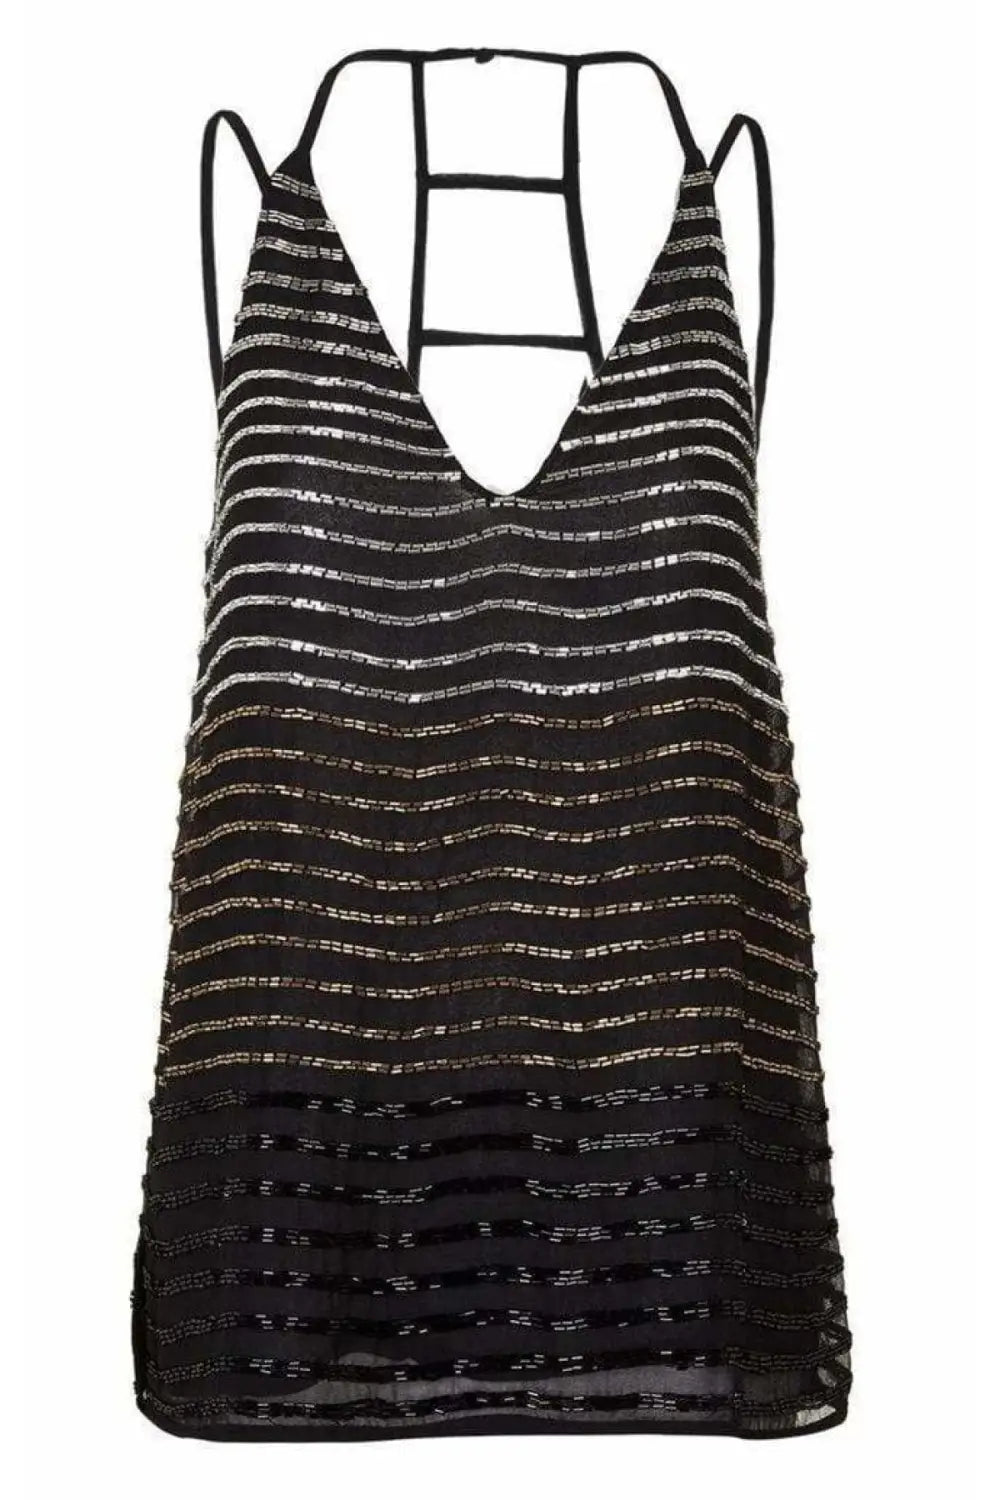 Topshop Beaded Party Cami Top